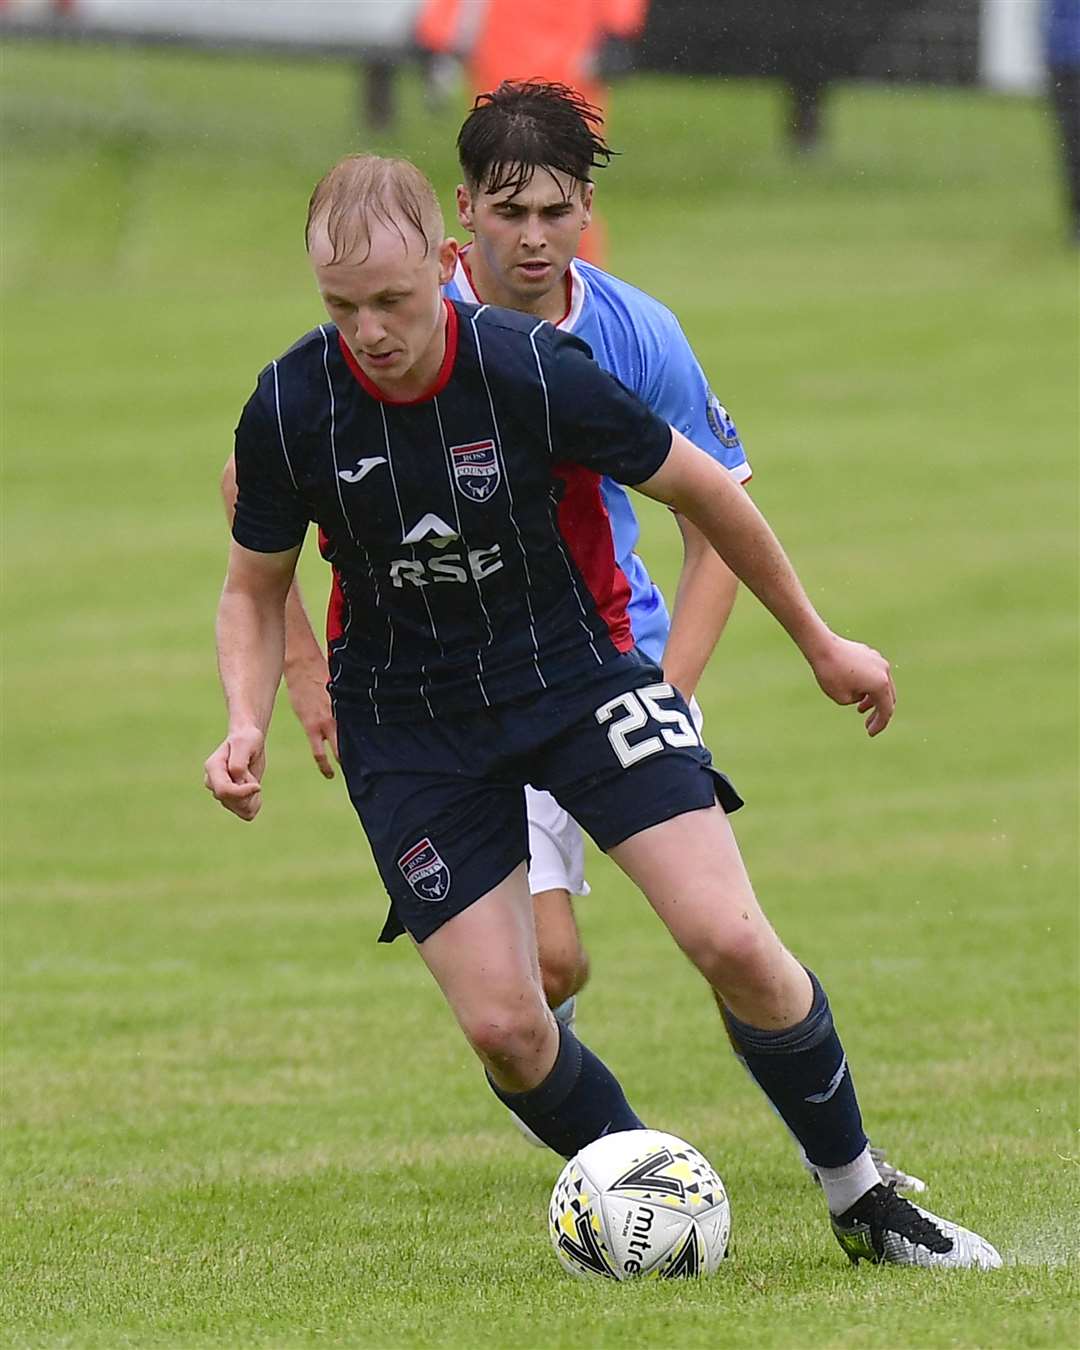 Ross County's Ethan Kevill and Wick's Gary Pullen at Harmsworth Park in July this year. Picture: Mel Roger